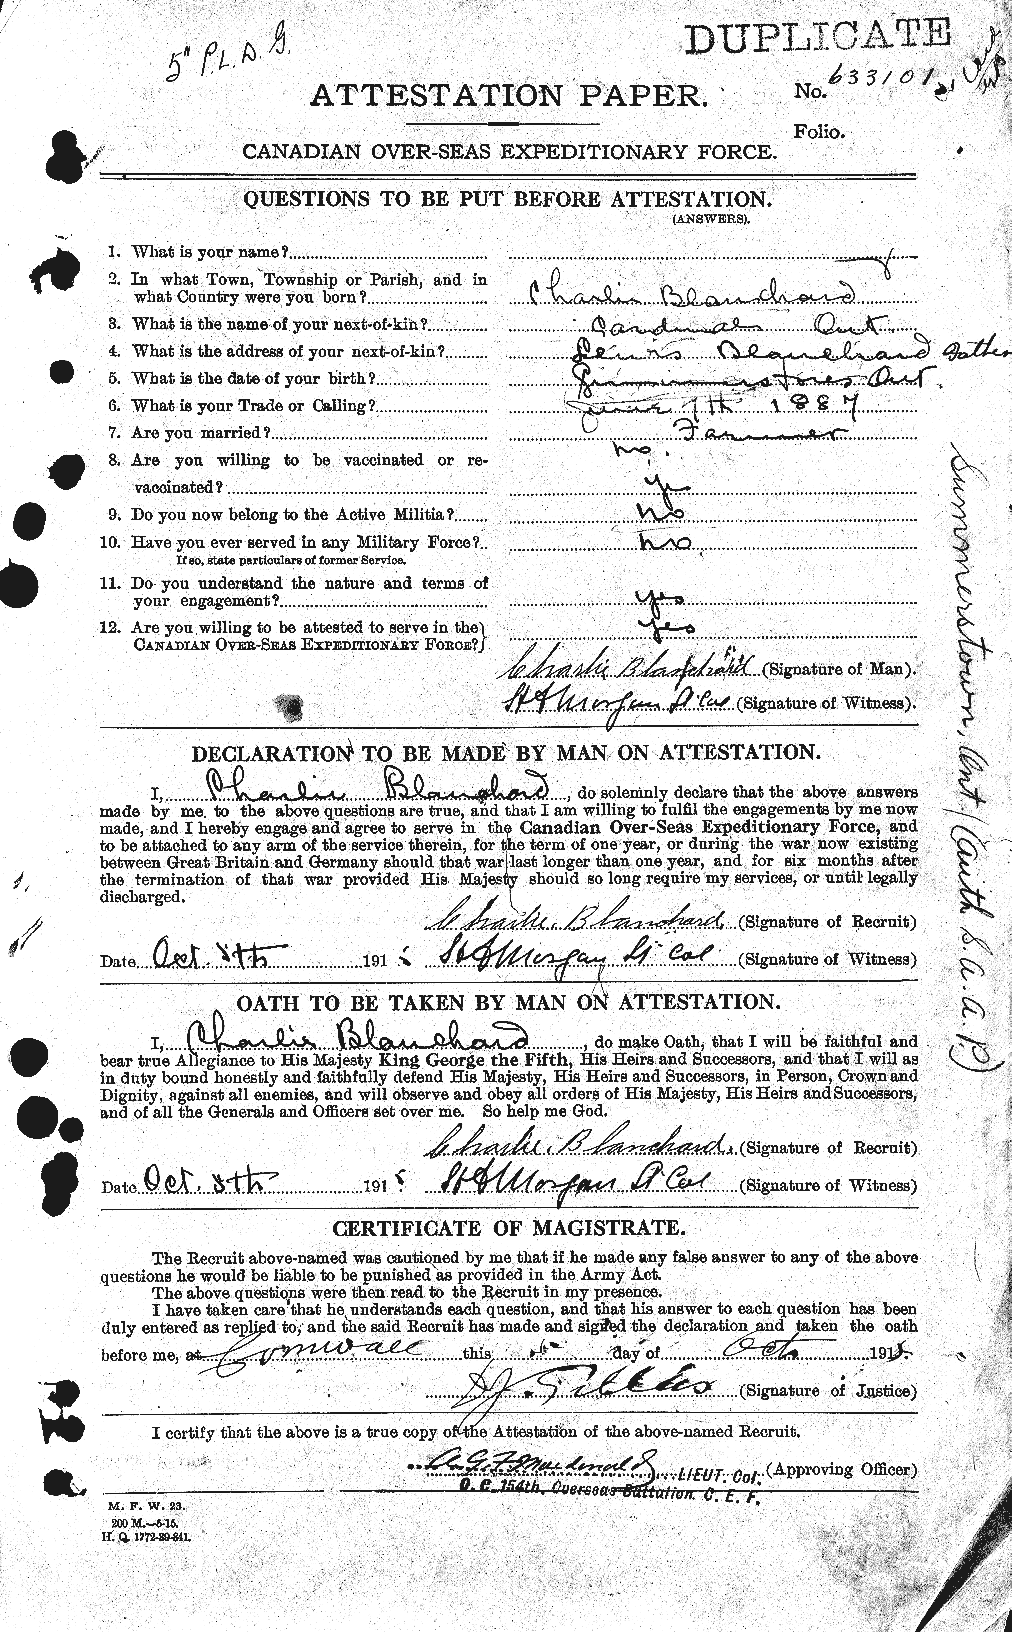 Personnel Records of the First World War - CEF 240358a